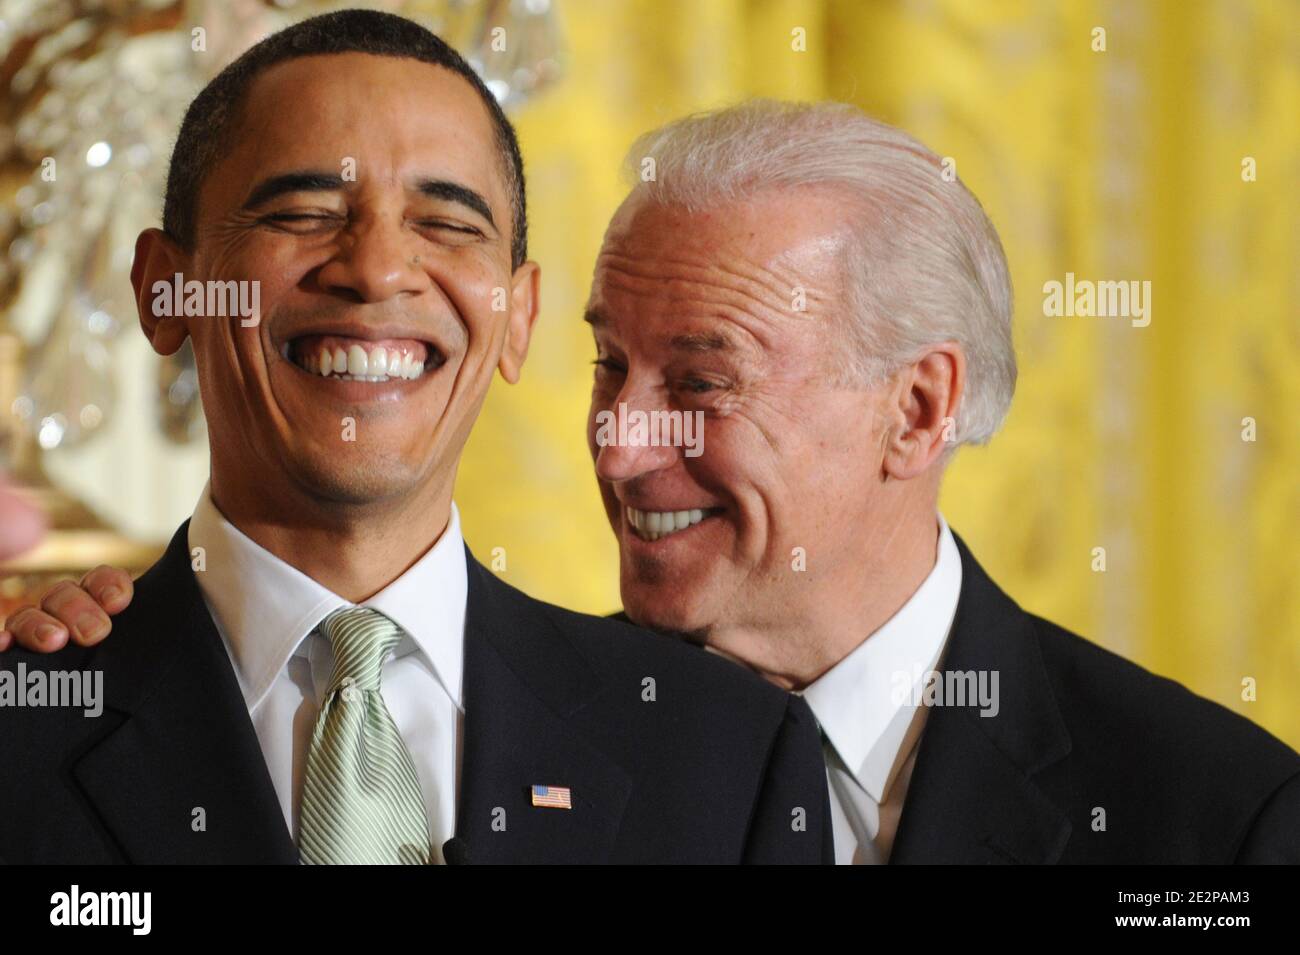 US President Barack Obama (L) and US Vice President Joe Biden (R) share a light moment during the annual St. Patrick's Day Reception in the East Room of the White House, in Washington DC, USA, on March 17, 2010. President Obama and the Prime Minister (Taoiseach) of Ireland Brian Cowen delivered remarks and participated in a traditional Shamrock ceremony. Photo by Michael Reynolds/Pool/ABACAPRESS.COM Stock Photo